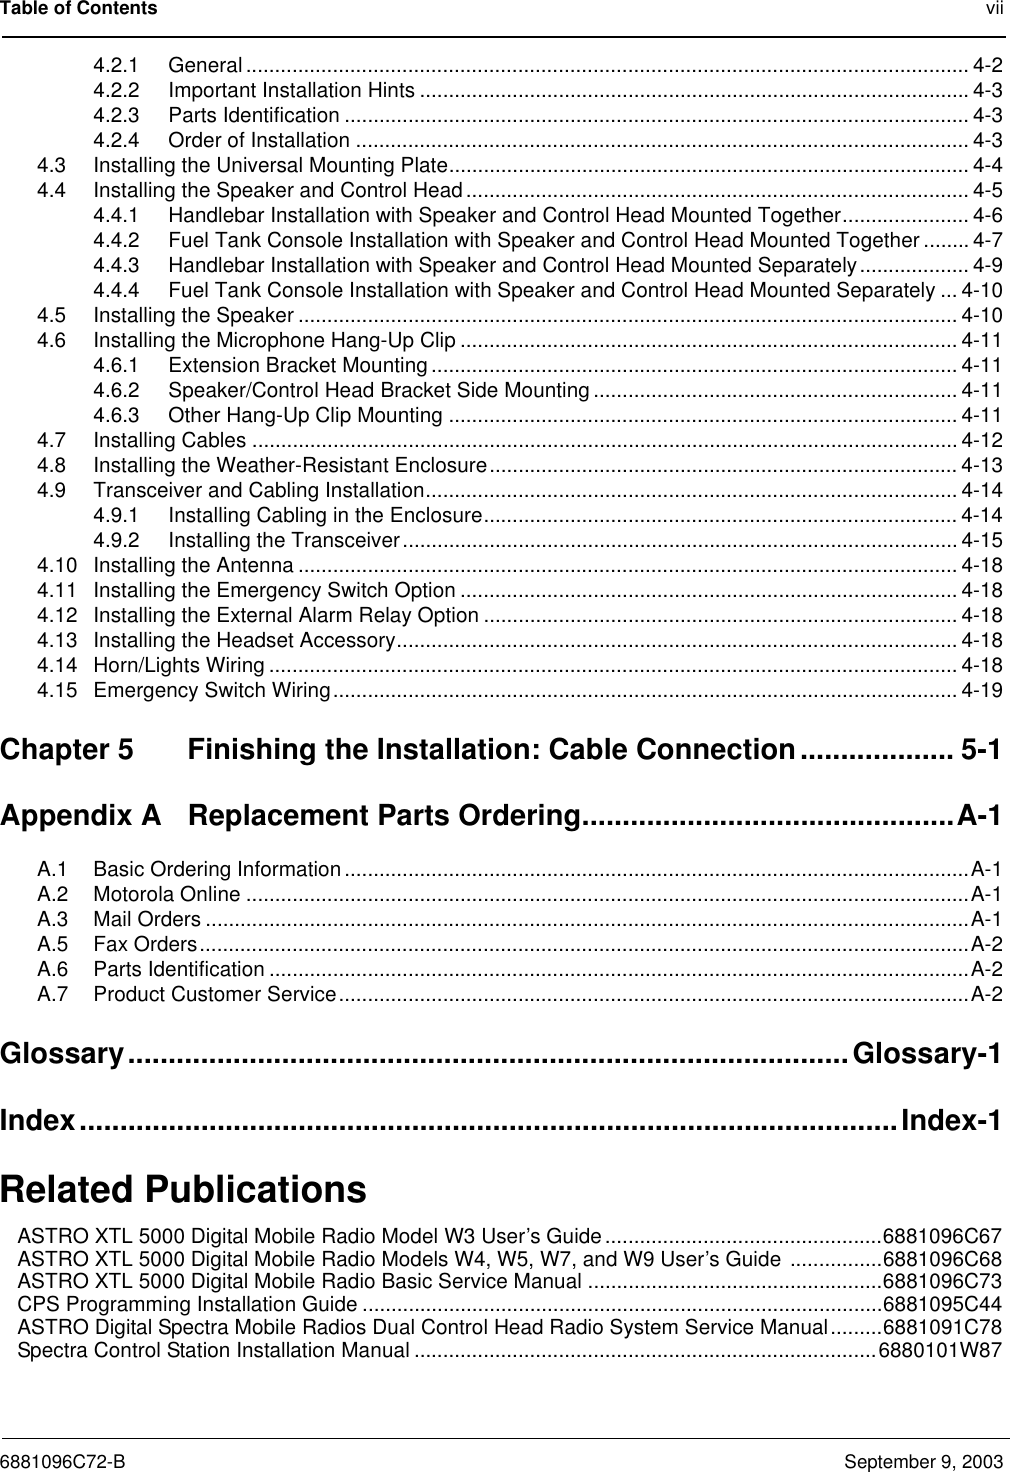 Table of Contents vii6881096C72-B September 9, 20034.2.1 General ............................................................................................................................. 4-24.2.2 Important Installation Hints ...............................................................................................4-34.2.3 Parts Identification ............................................................................................................ 4-34.2.4 Order of Installation .......................................................................................................... 4-34.3 Installing the Universal Mounting Plate.......................................................................................... 4-44.4 Installing the Speaker and Control Head ....................................................................................... 4-54.4.1 Handlebar Installation with Speaker and Control Head Mounted Together...................... 4-64.4.2 Fuel Tank Console Installation with Speaker and Control Head Mounted Together ........ 4-74.4.3 Handlebar Installation with Speaker and Control Head Mounted Separately................... 4-94.4.4 Fuel Tank Console Installation with Speaker and Control Head Mounted Separately ... 4-104.5 Installing the Speaker .................................................................................................................. 4-104.6 Installing the Microphone Hang-Up Clip ...................................................................................... 4-114.6.1 Extension Bracket Mounting ........................................................................................... 4-114.6.2 Speaker/Control Head Bracket Side Mounting ............................................................... 4-114.6.3 Other Hang-Up Clip Mounting ........................................................................................ 4-114.7 Installing Cables .......................................................................................................................... 4-124.8 Installing the Weather-Resistant Enclosure................................................................................. 4-134.9 Transceiver and Cabling Installation............................................................................................ 4-144.9.1 Installing Cabling in the Enclosure.................................................................................. 4-144.9.2 Installing the Transceiver................................................................................................ 4-154.10 Installing the Antenna .................................................................................................................. 4-184.11 Installing the Emergency Switch Option ......................................................................................4-184.12 Installing the External Alarm Relay Option ..................................................................................4-184.13 Installing the Headset Accessory................................................................................................. 4-184.14 Horn/Lights Wiring ....................................................................................................................... 4-184.15 Emergency Switch Wiring............................................................................................................ 4-19Chapter 5 Finishing the Installation: Cable Connection................... 5-1Appendix A Replacement Parts Ordering..............................................A-1A.1 Basic Ordering Information ............................................................................................................A-1A.2 Motorola Online .............................................................................................................................A-1A.3 Mail Orders ....................................................................................................................................A-1A.5 Fax Orders.....................................................................................................................................A-2A.6 Parts Identification .........................................................................................................................A-2A.7 Product Customer Service.............................................................................................................A-2Glossary.........................................................................................Glossary-1Index.....................................................................................................Index-1Related PublicationsASTRO XTL 5000 Digital Mobile Radio Model W3 User’s Guide ................................................6881096C67ASTRO XTL 5000 Digital Mobile Radio Models W4, W5, W7, and W9 User’s Guide ................6881096C68ASTRO XTL 5000 Digital Mobile Radio Basic Service Manual ...................................................6881096C73CPS Programming Installation Guide ..........................................................................................6881095C44ASTRO Digital Spectra Mobile Radios Dual Control Head Radio System Service Manual.........6881091C78Spectra Control Station Installation Manual ................................................................................6880101W87